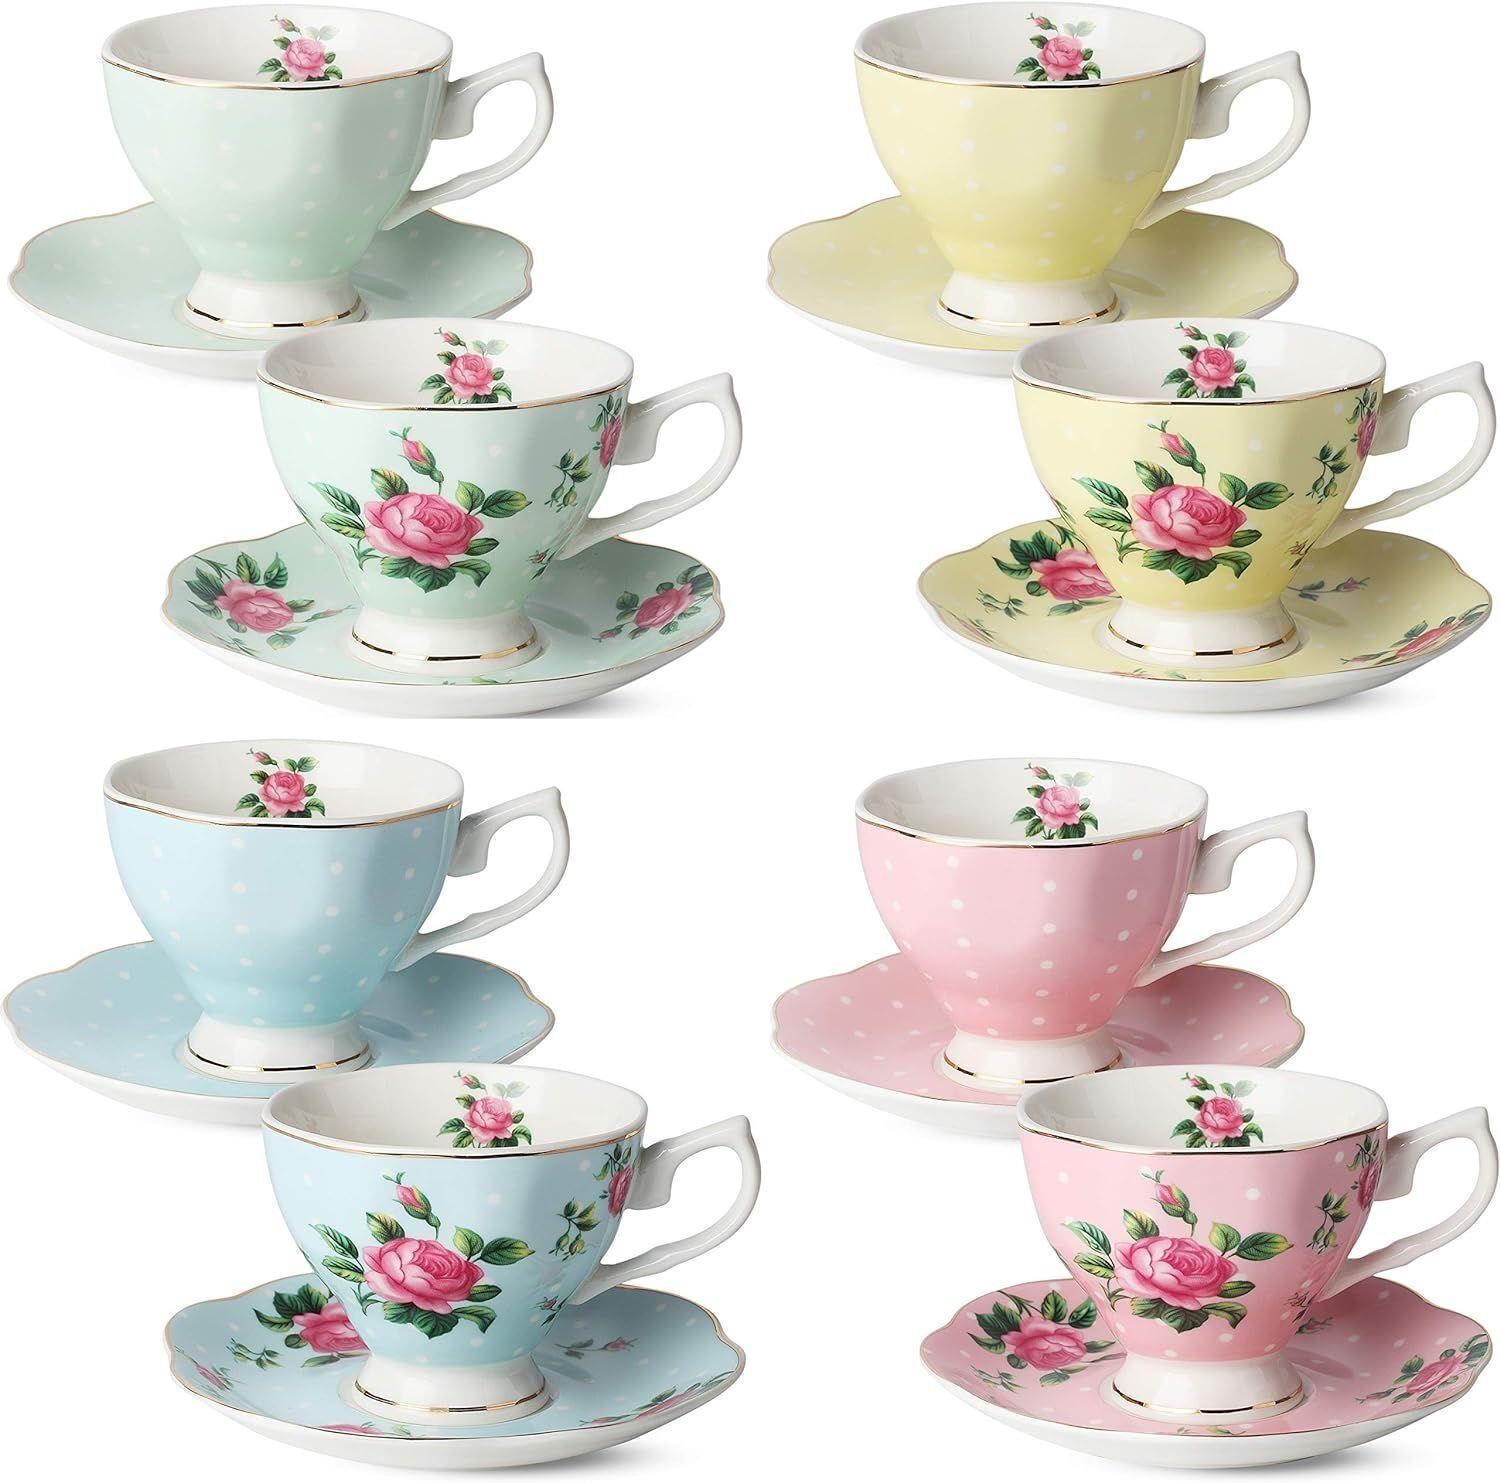 Floral Tea Cups and Saucers